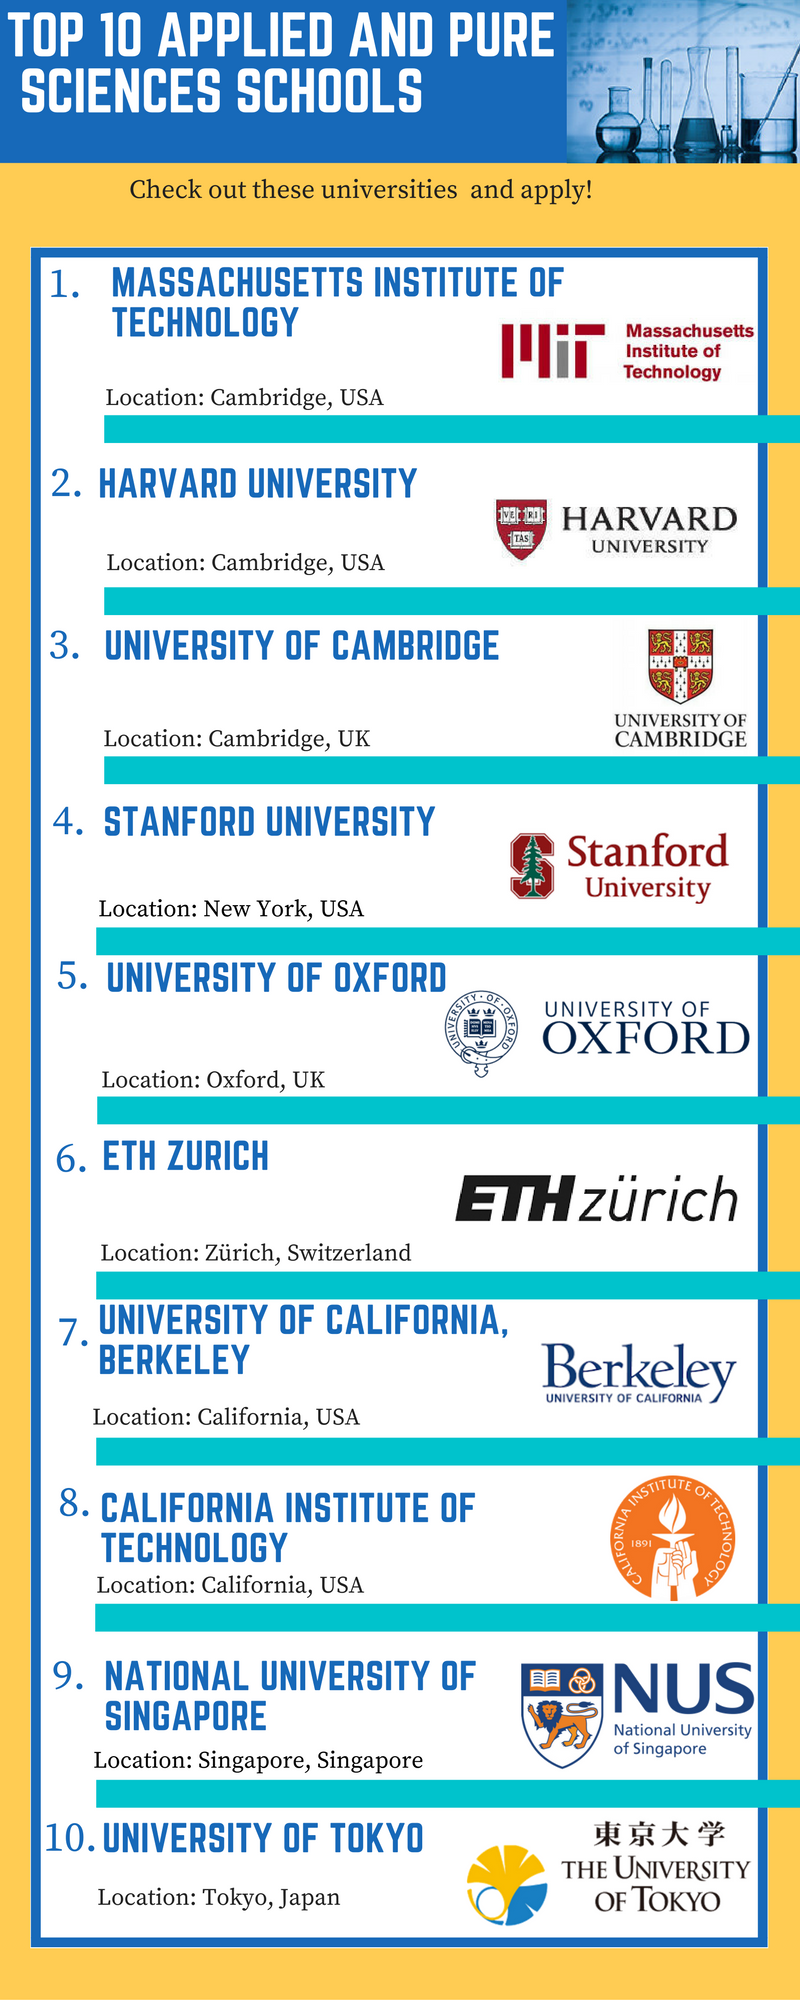 Top 10 applied and pure sciences schools